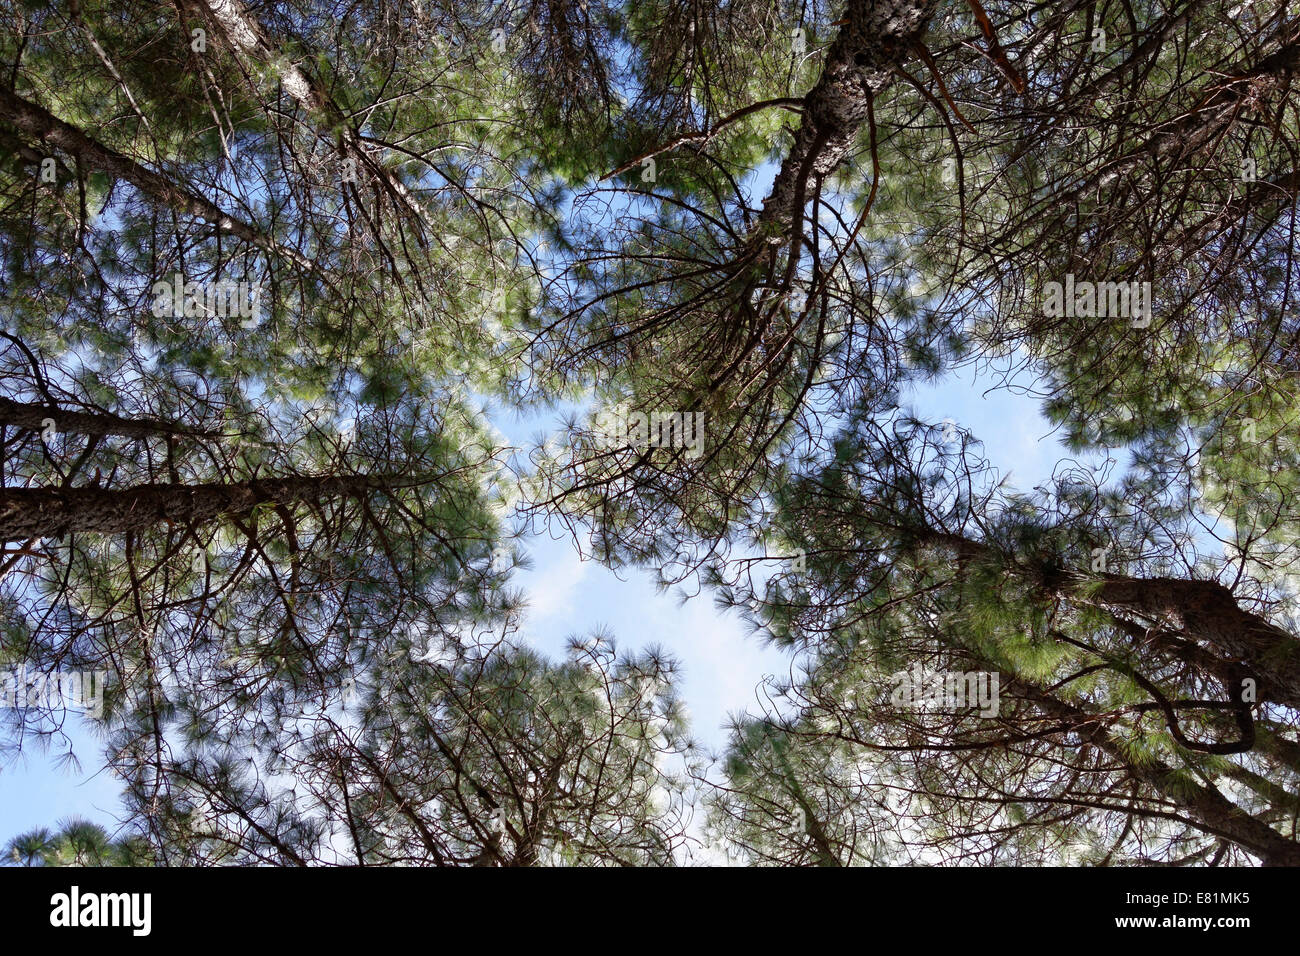 Pine forest, Canary Island Pines (Pinus canariensis), La Palma, Canary Islands, Spain Stock Photo